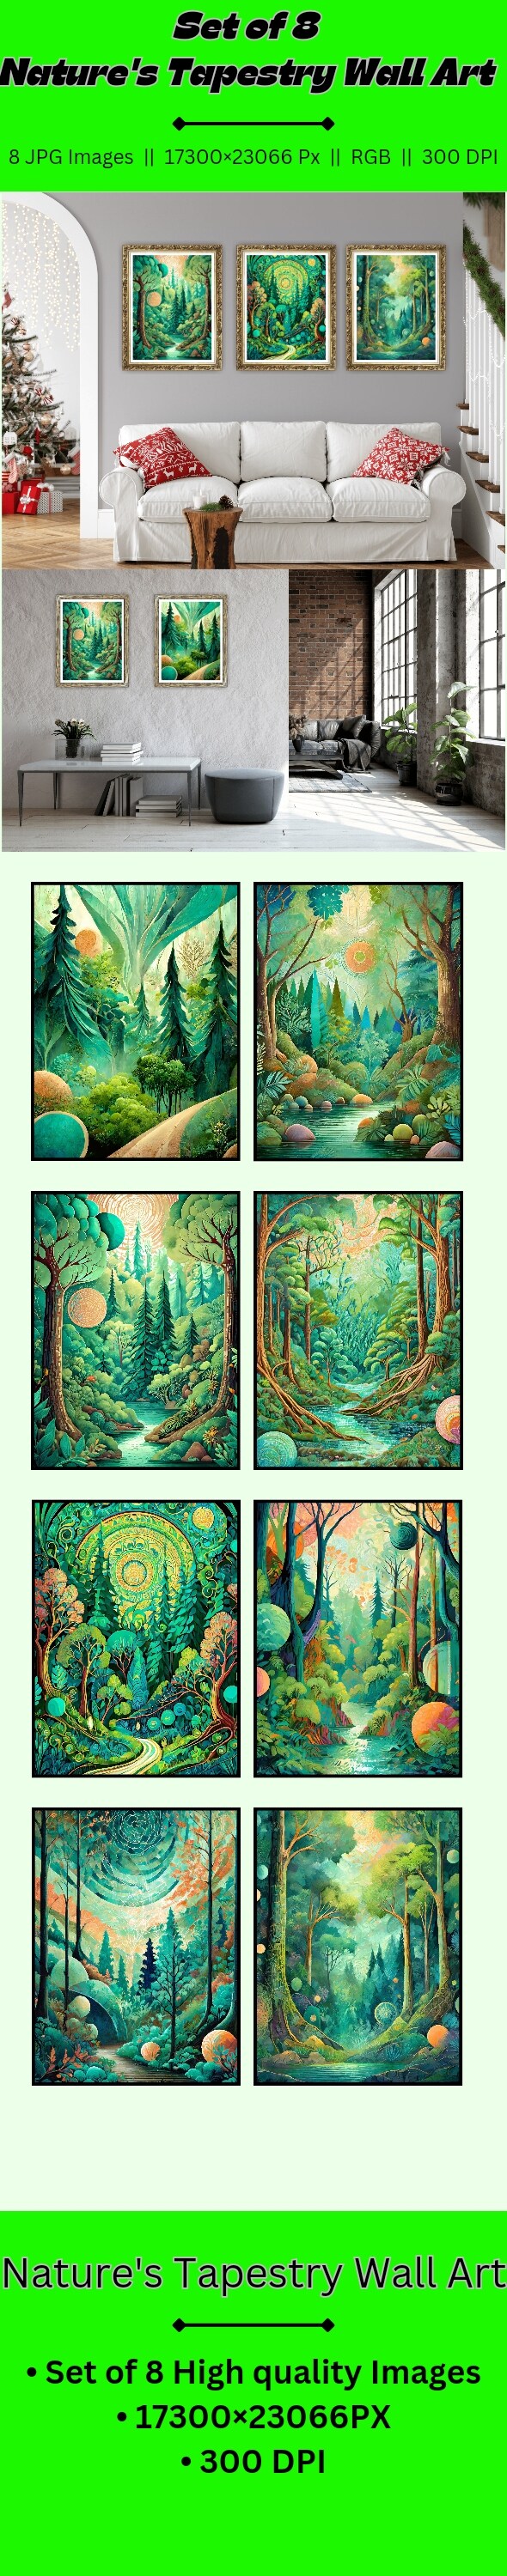 preview of nature tapestry 779